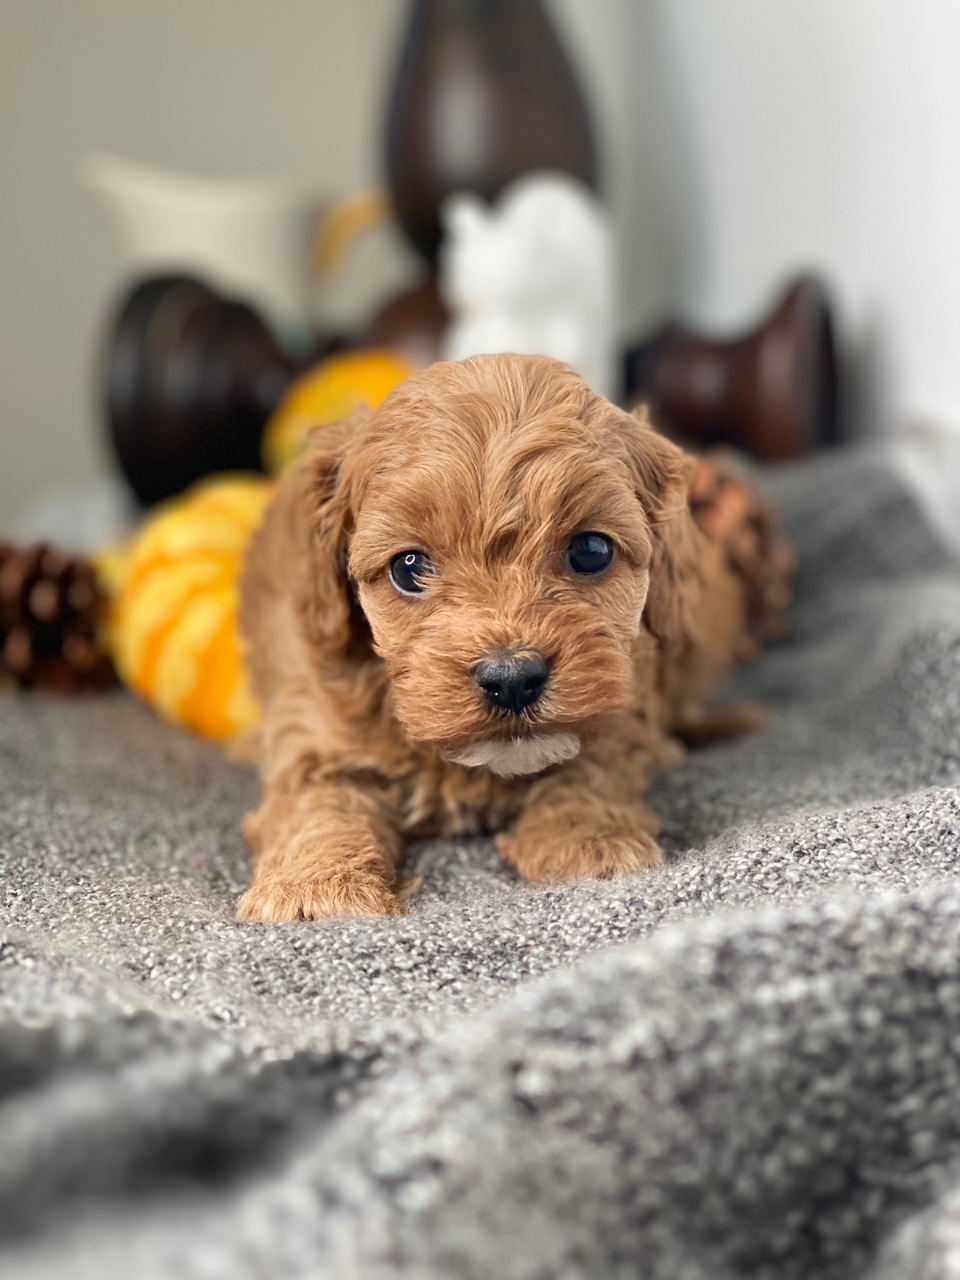 A small brown male Cavapoo peacefully rests on a soft blanket, its eyes closed and paws tucked underneath its body.